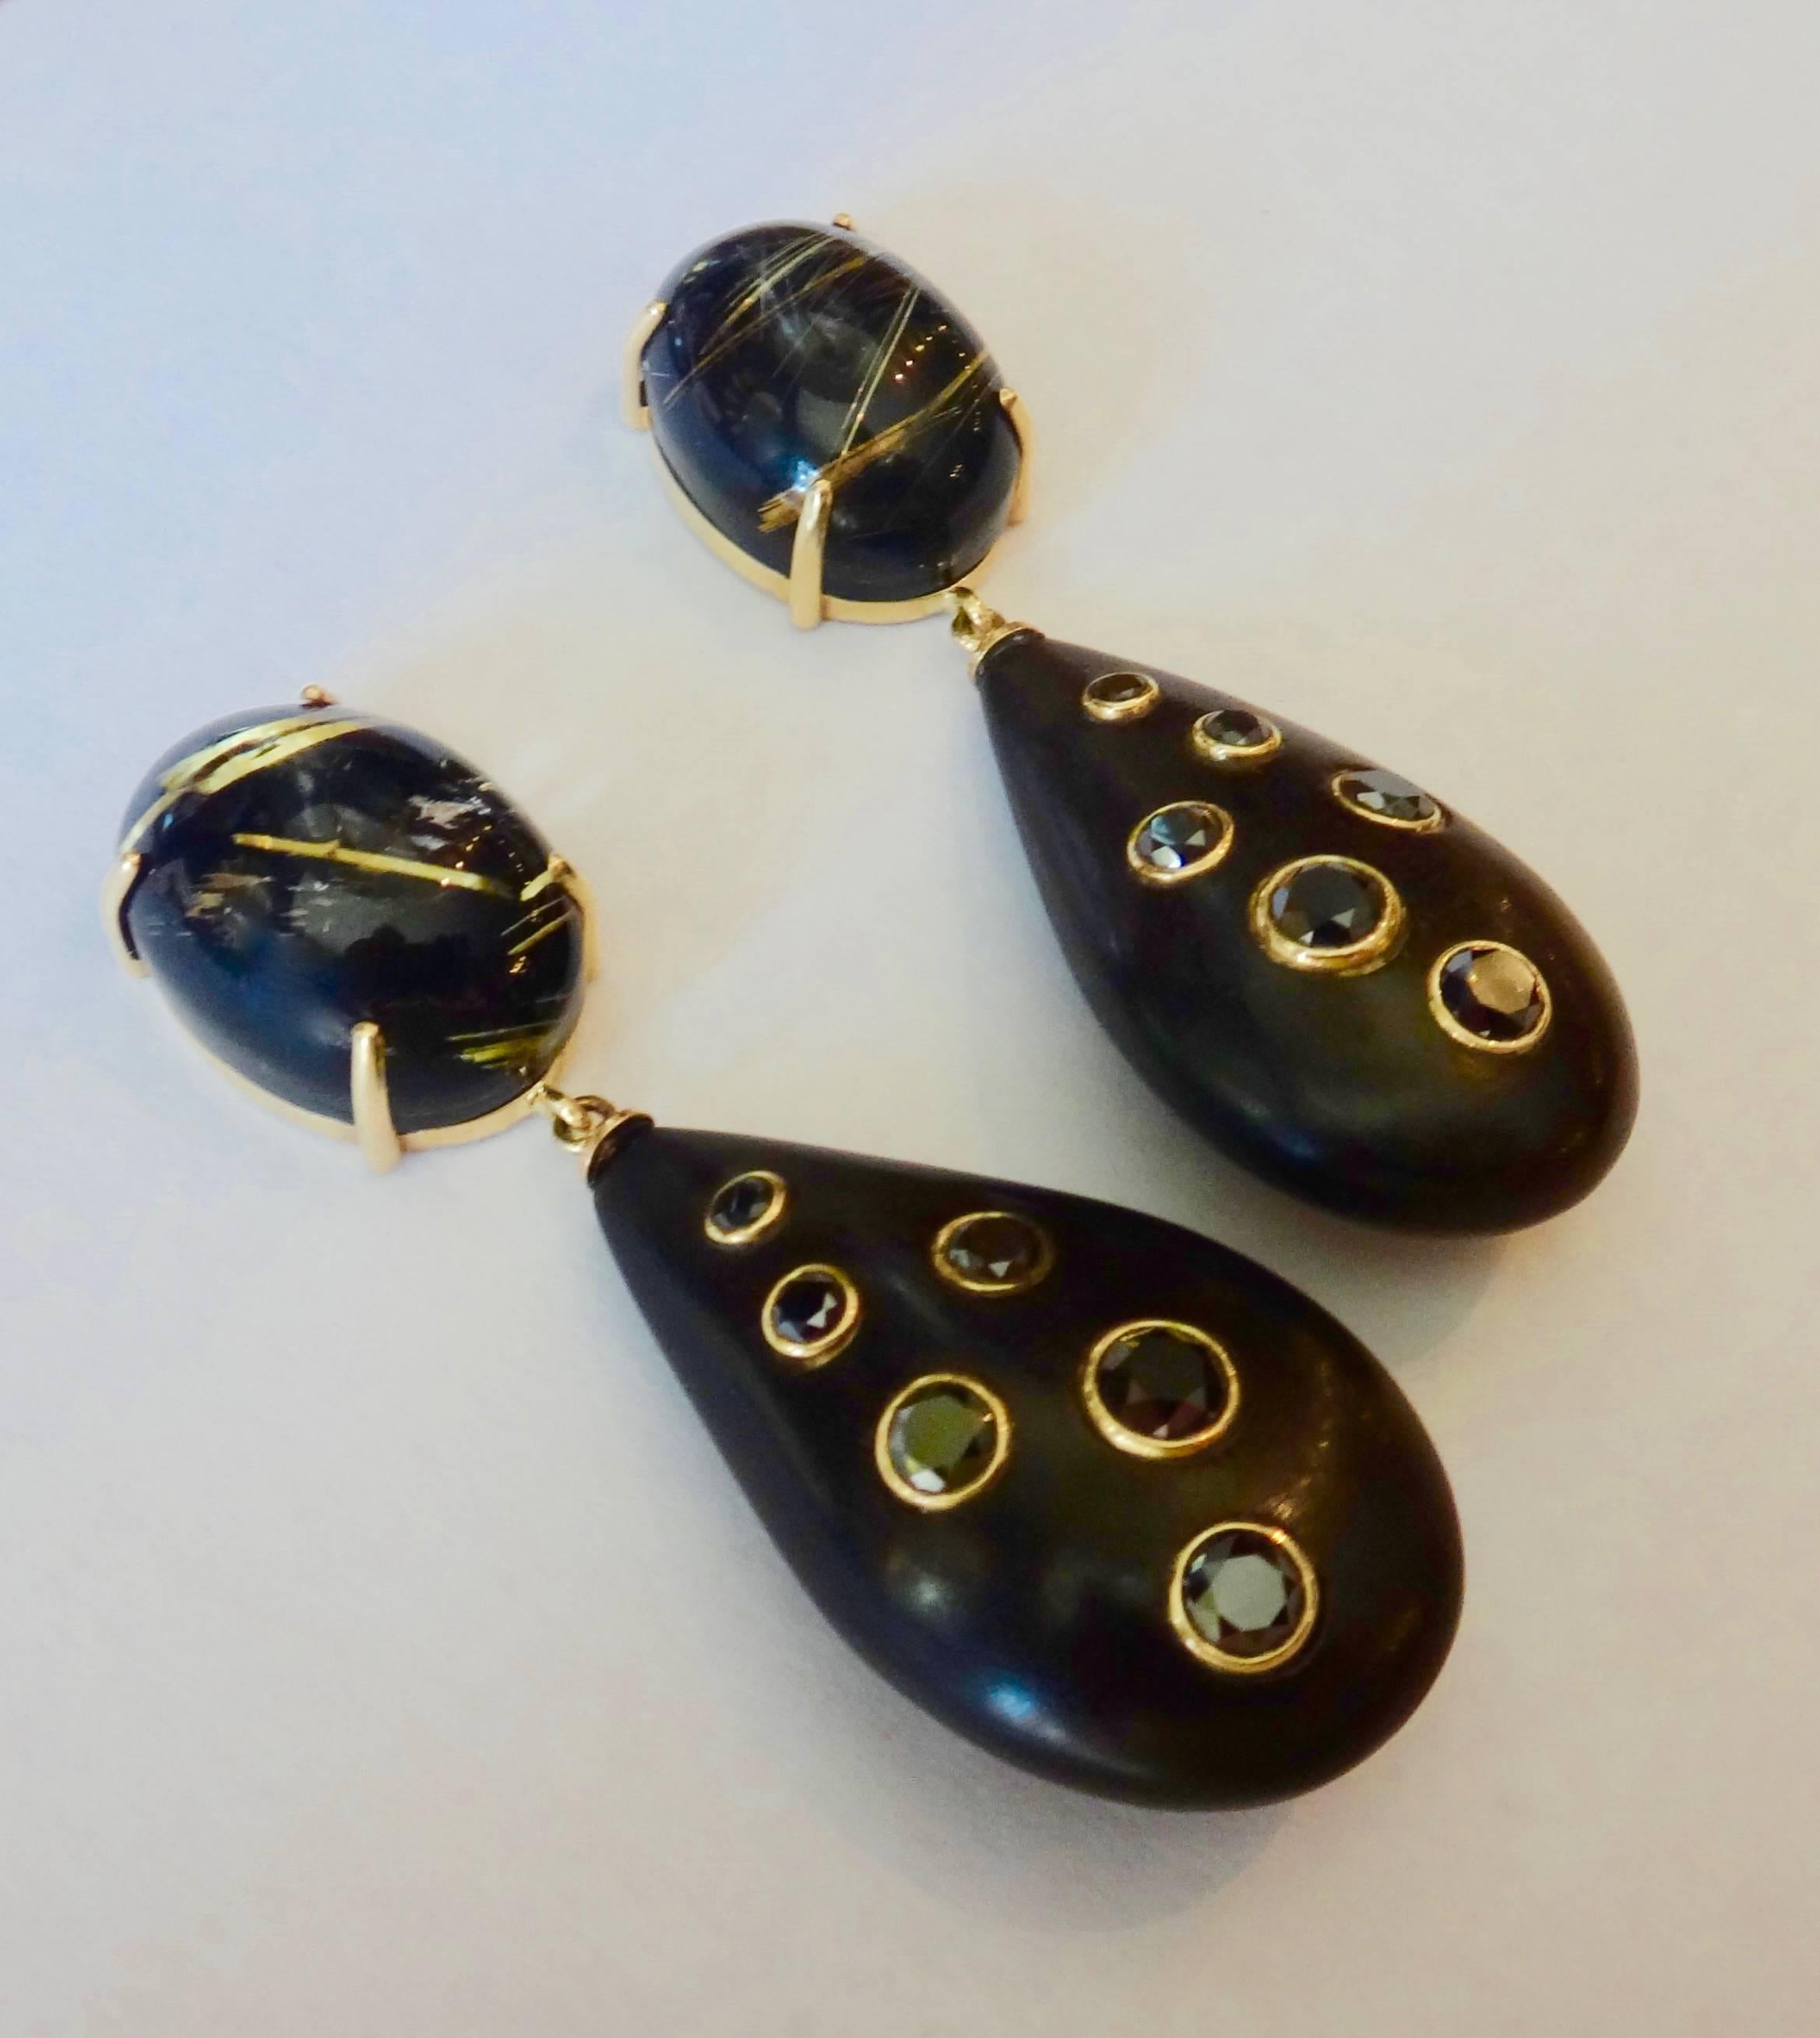 Dangle earrings composed of carved ebony embellished with twelve black diamonds and suspended from highly unusual black jade backed rutilated quartz. The backing really makes the golden rutile 